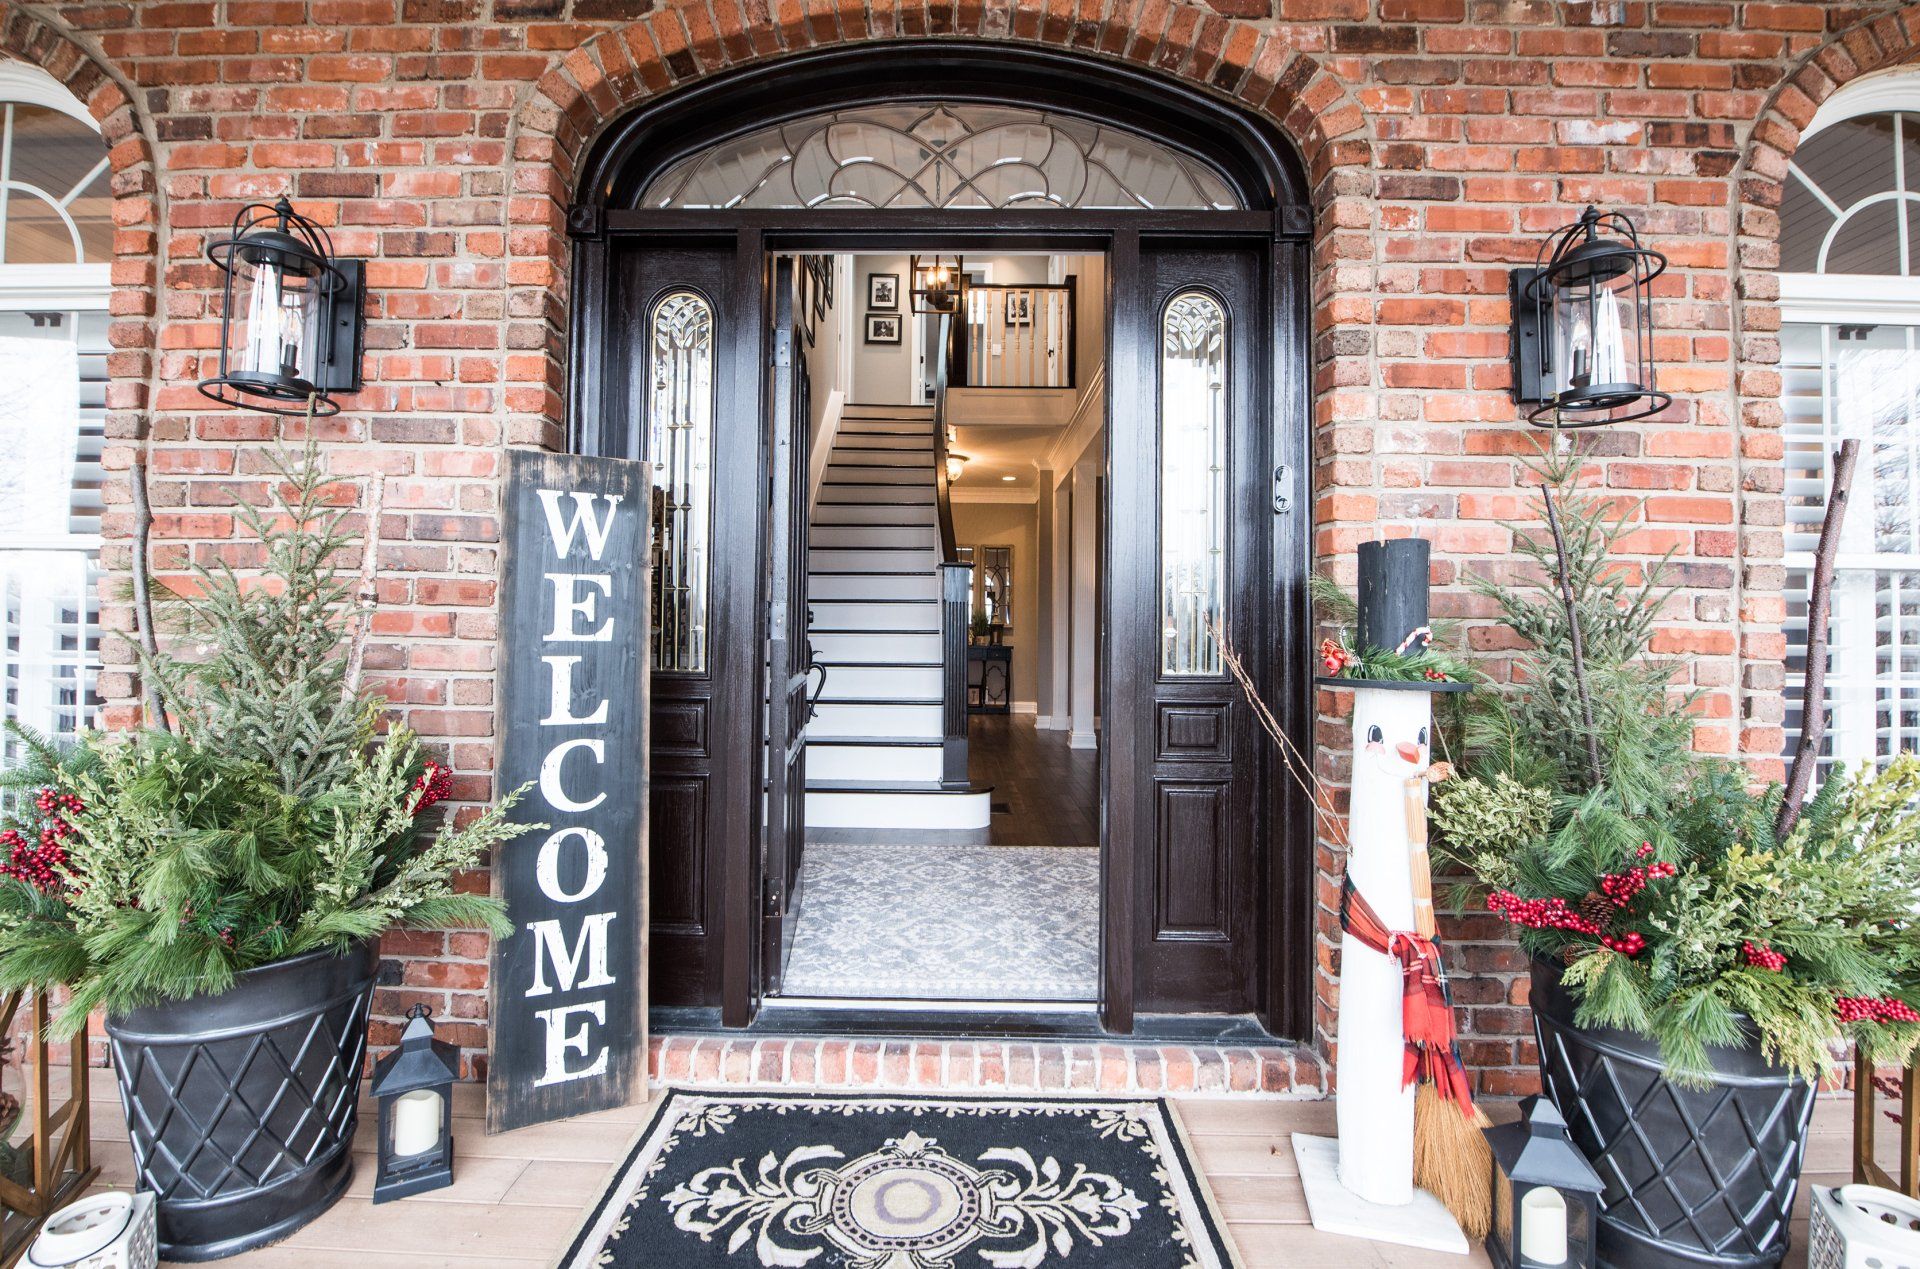 the front door of a brick house decorated for christmas with a welcome sign .